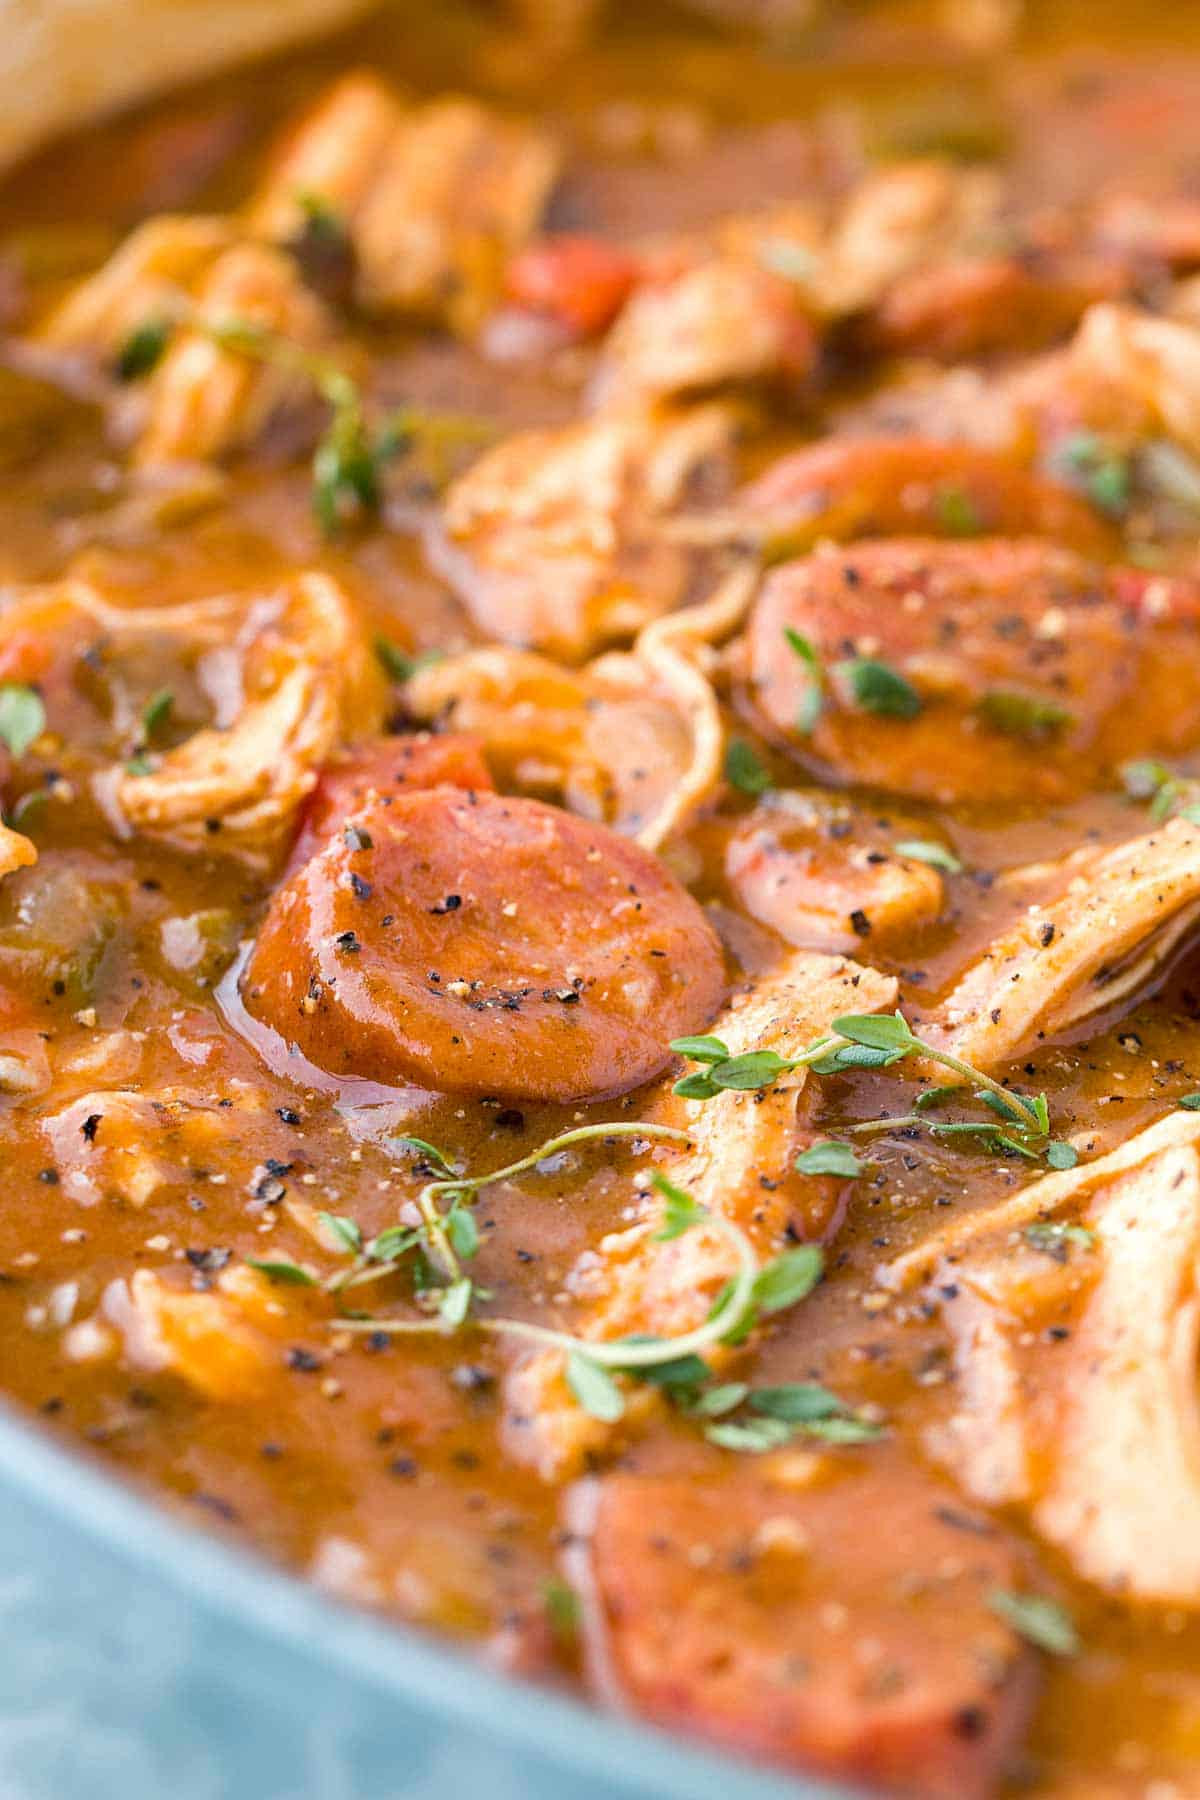 Gumbo Recipe Seafood Chicken And Sausage
 New Orleans Chicken Andouille Sausage Gumbo Jessica Gavin